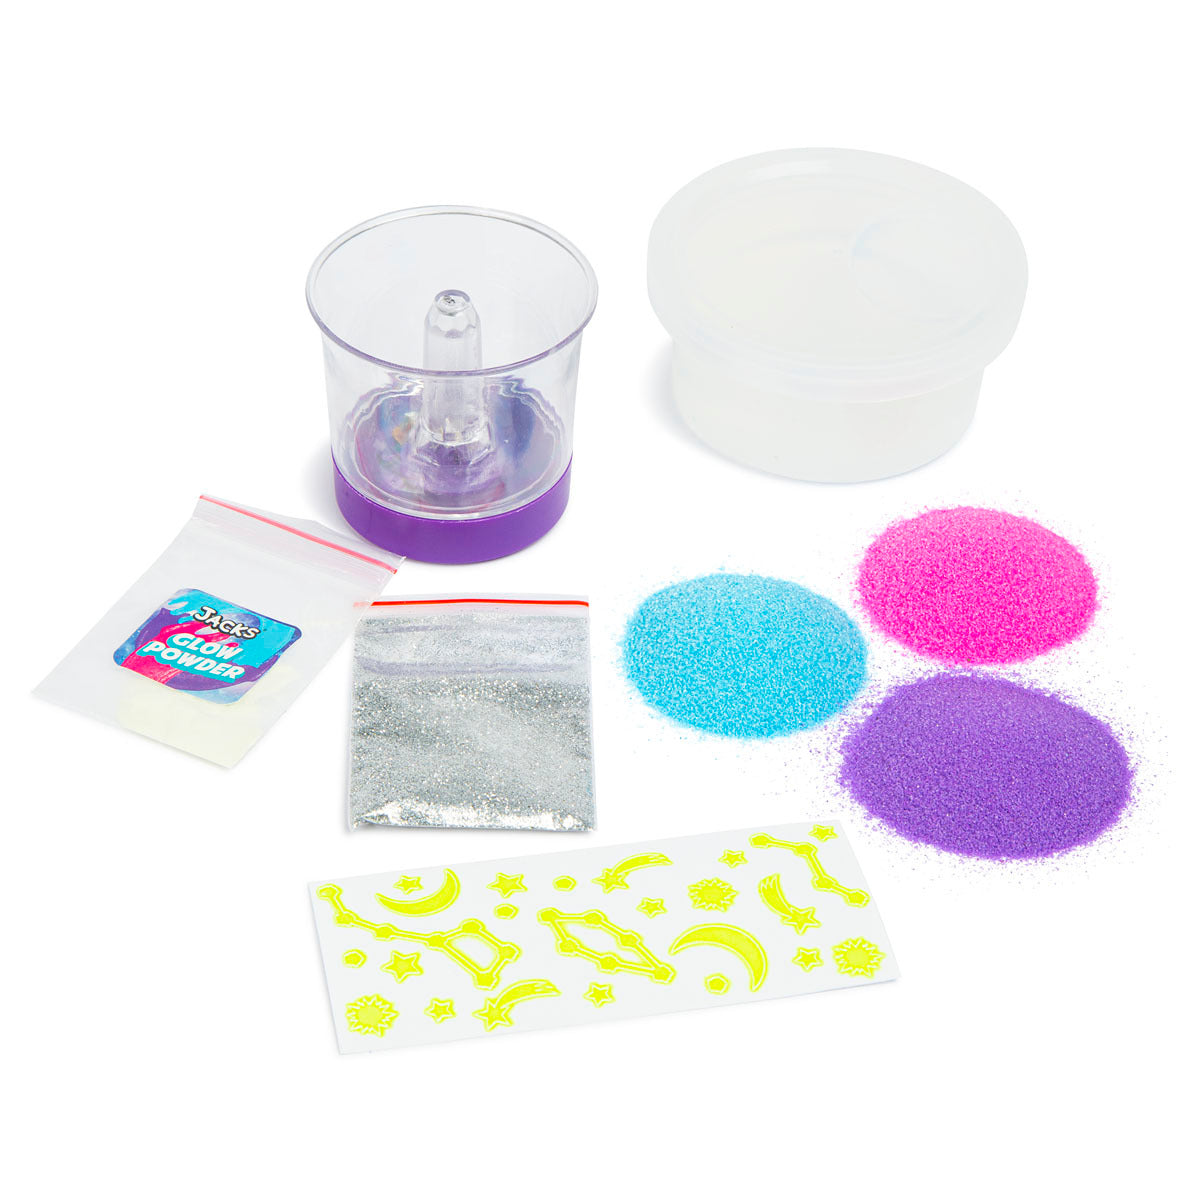 Jack's Cosmic Slime LED Glow In The Dark Candle Set